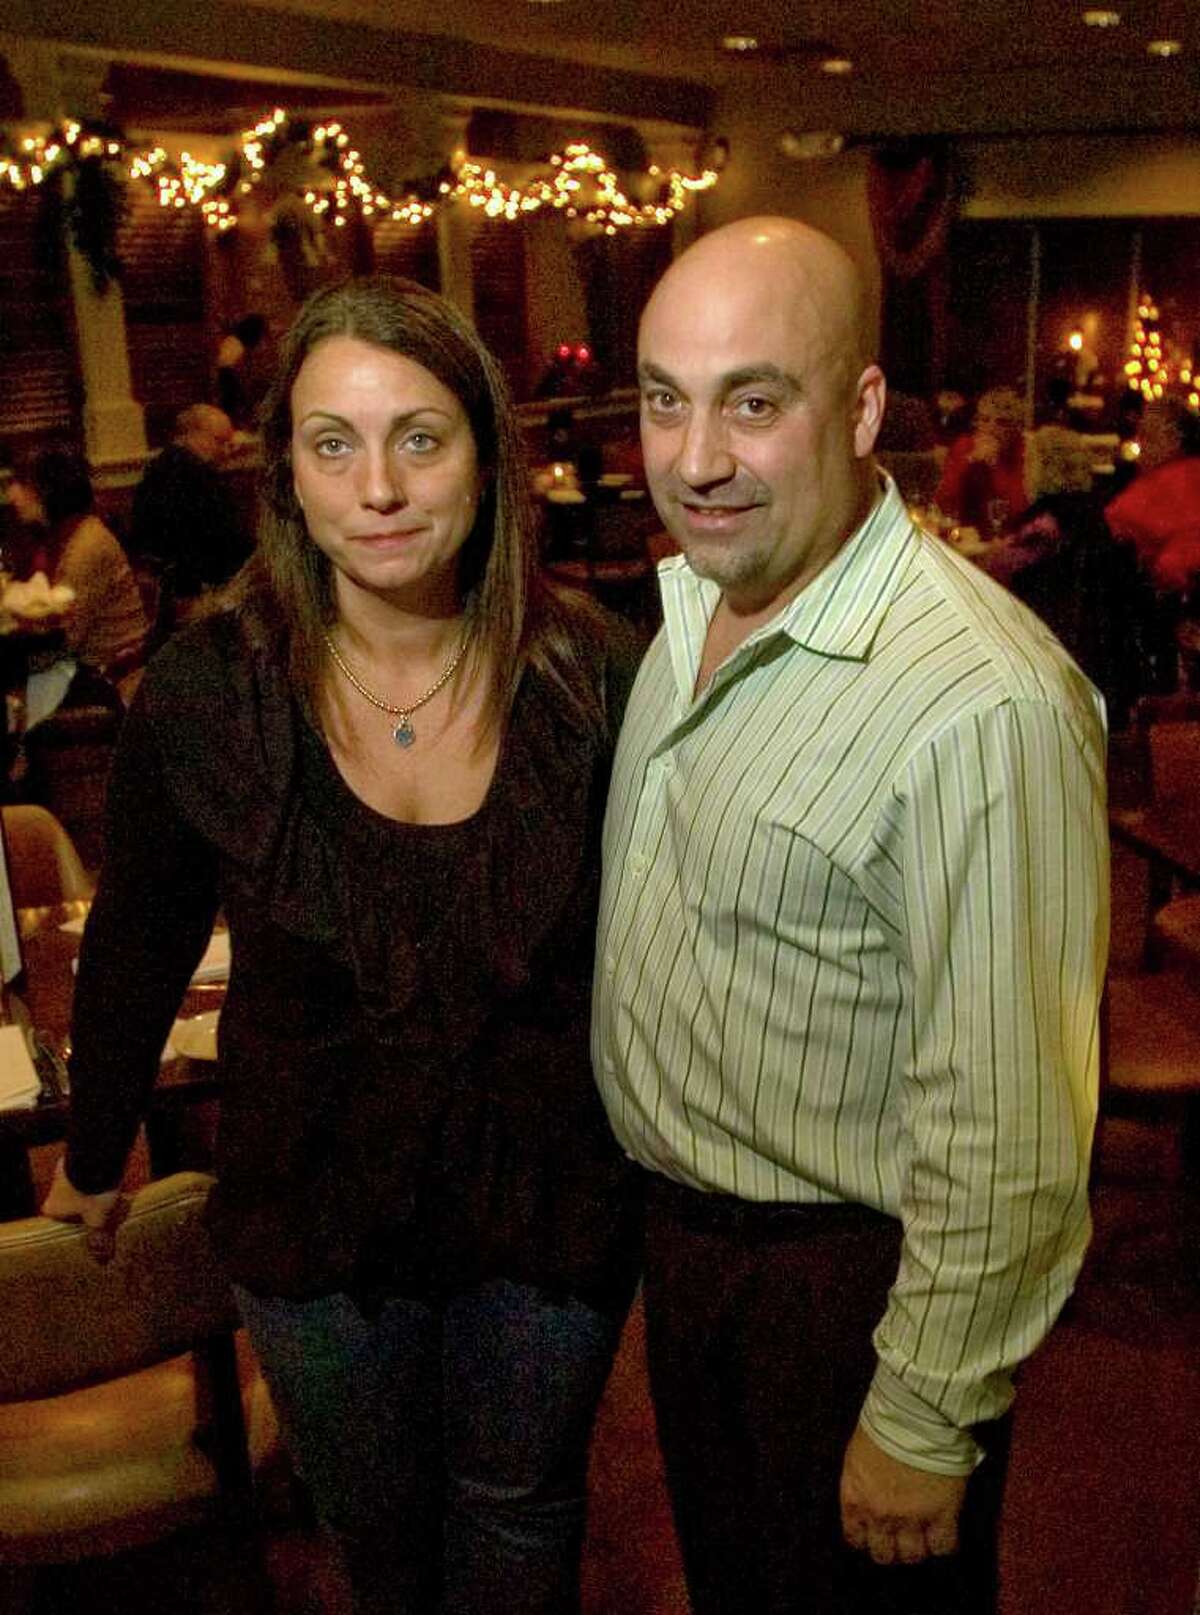 Siblings Michelle and Tommy Barbarie pose in the dining room at Jim Barbarie's Restaurant in Danbury on Wednesday, Dec. 21, 2011. Jim Barbarie's Restaurant is celebrating its 50th anniversary.